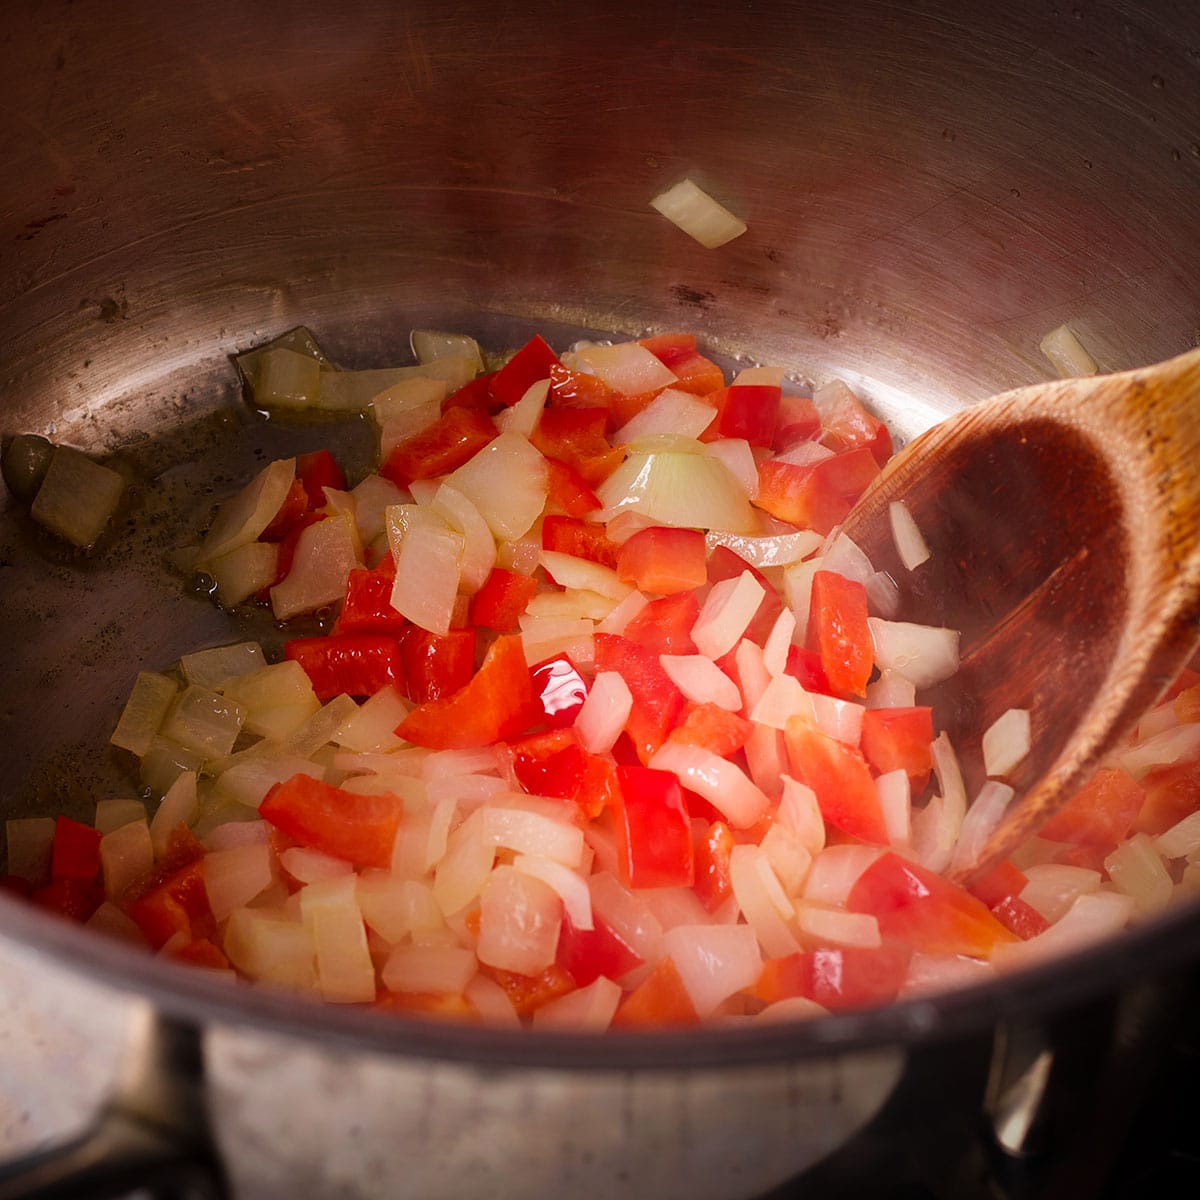 Using a wooden spoon to stir chopped onions and red bell peppers in a saucepan while they cook.